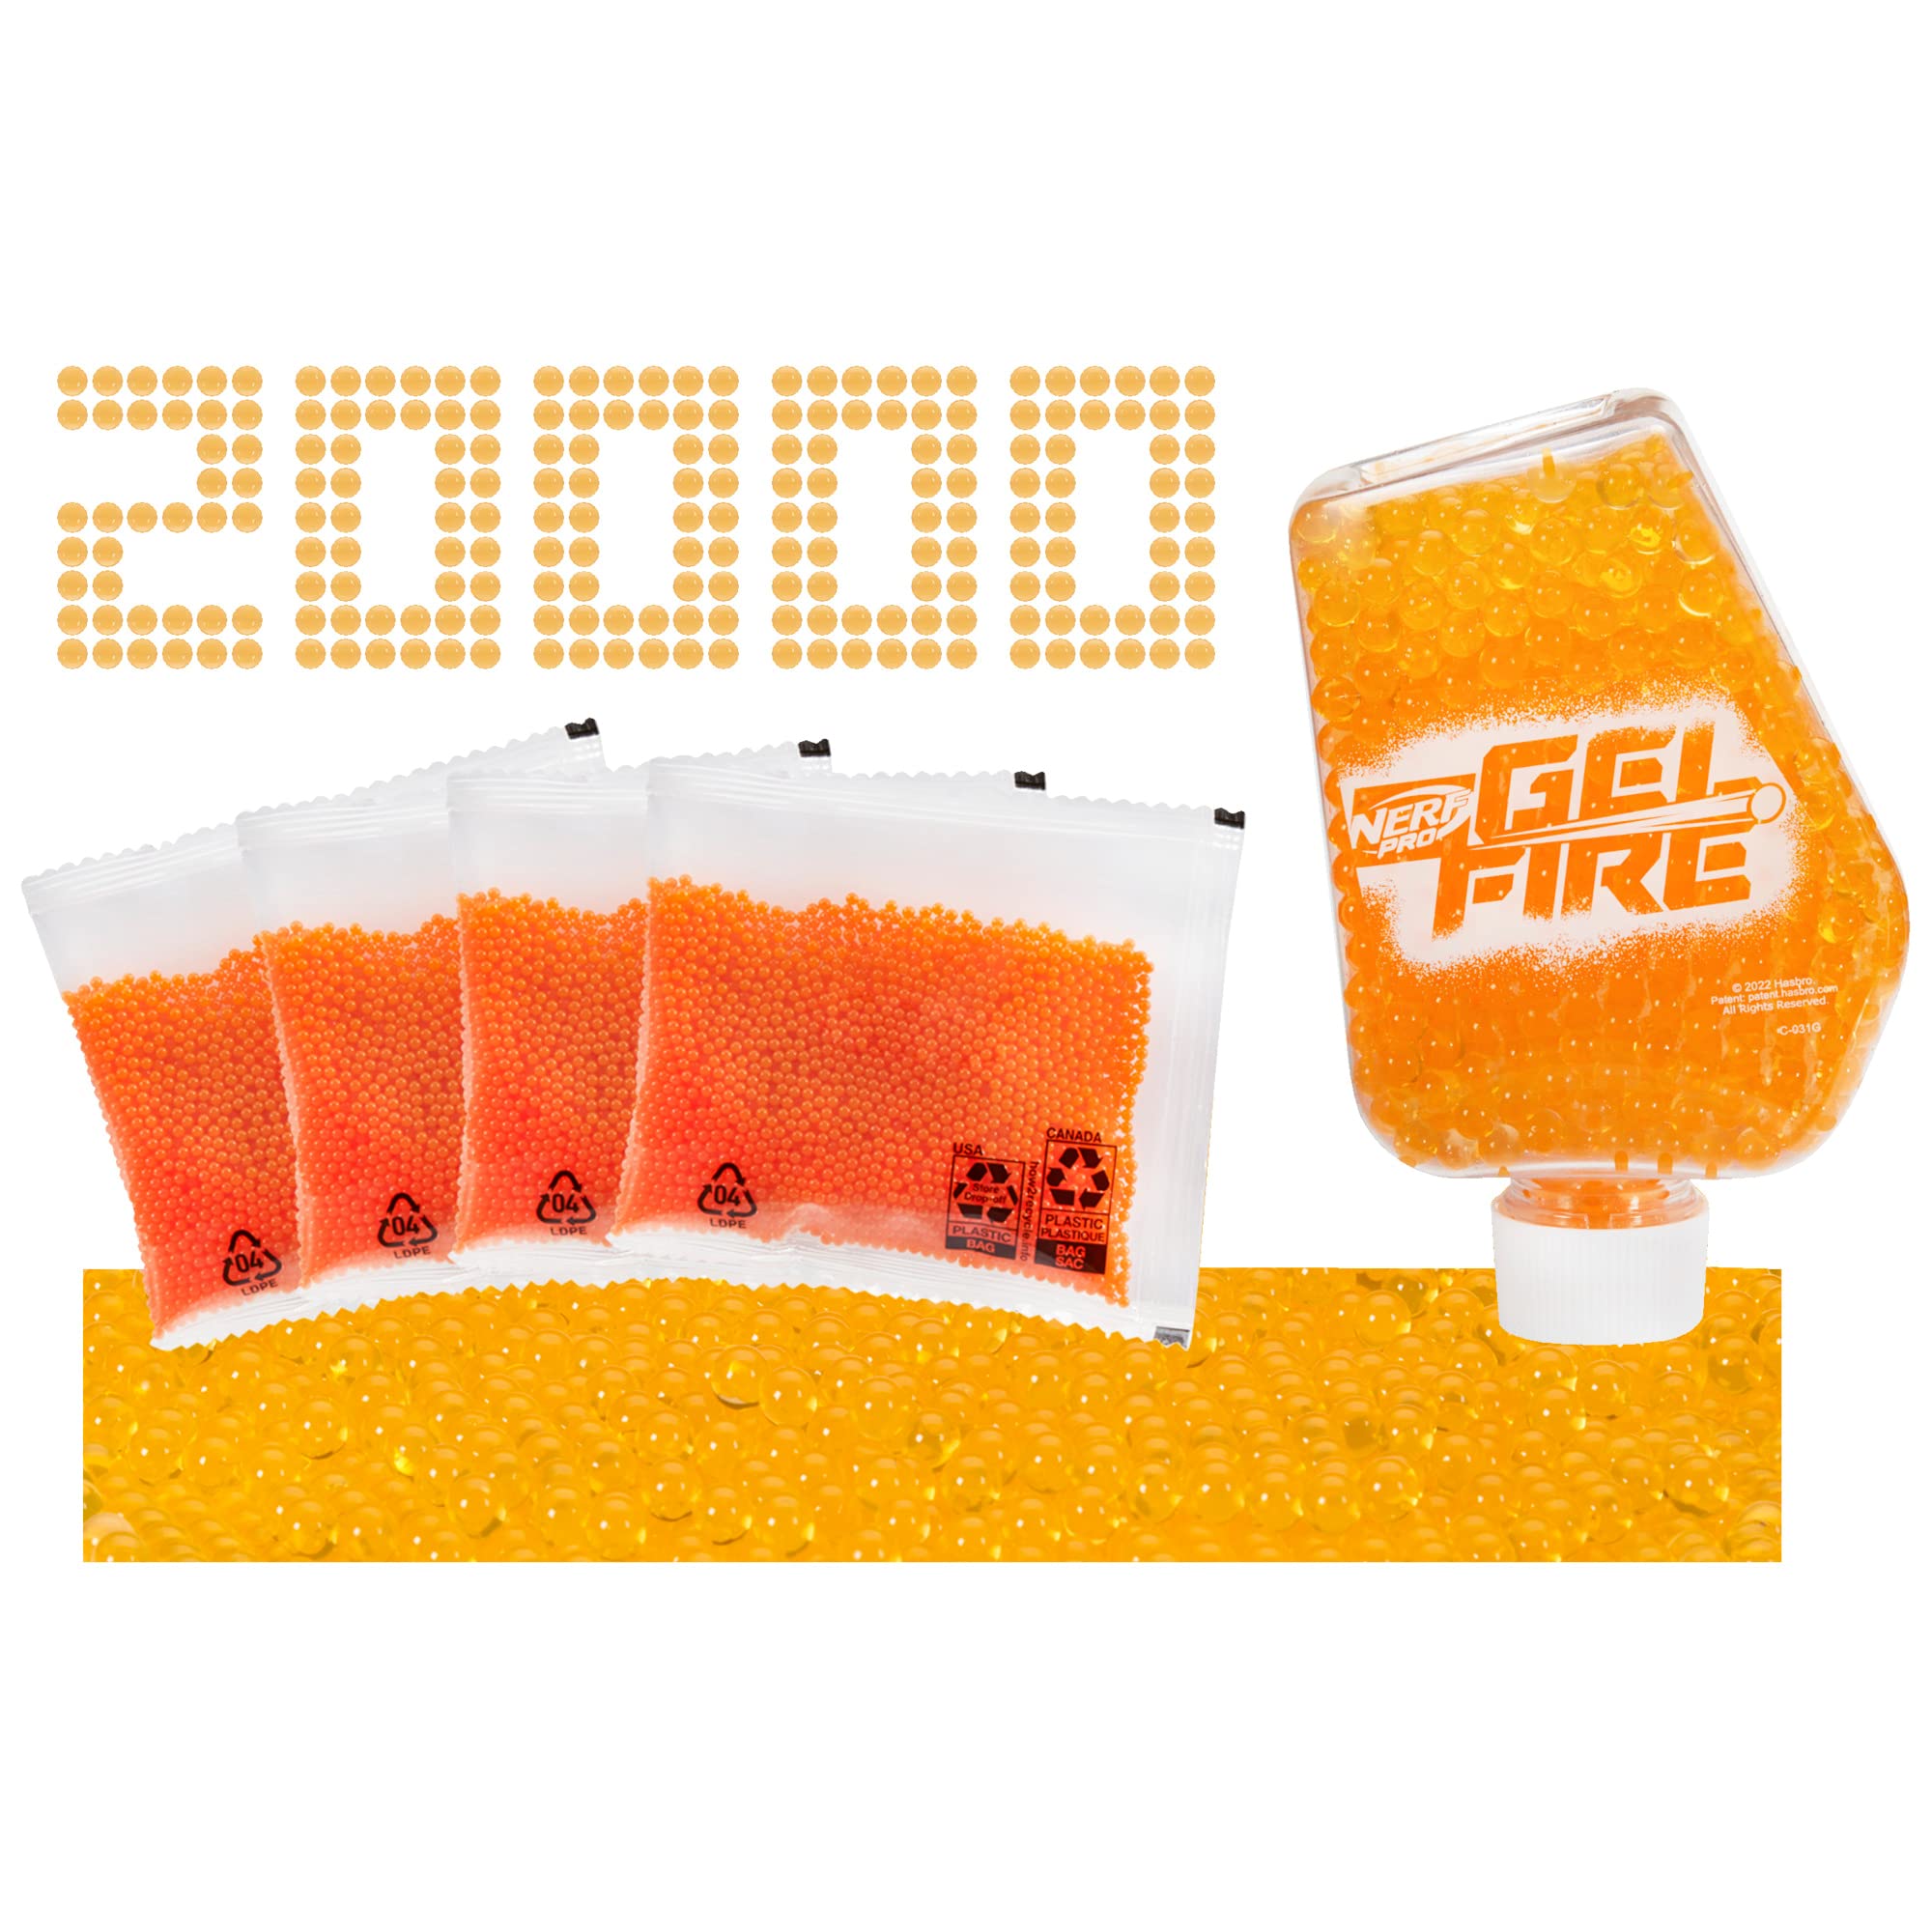 20,000-Round NERF Pro Gelfire Refill Dehydrated Rounds for Pro Gelfire Blasters $4.99 + Free Shipping w/ Prime or on $25+